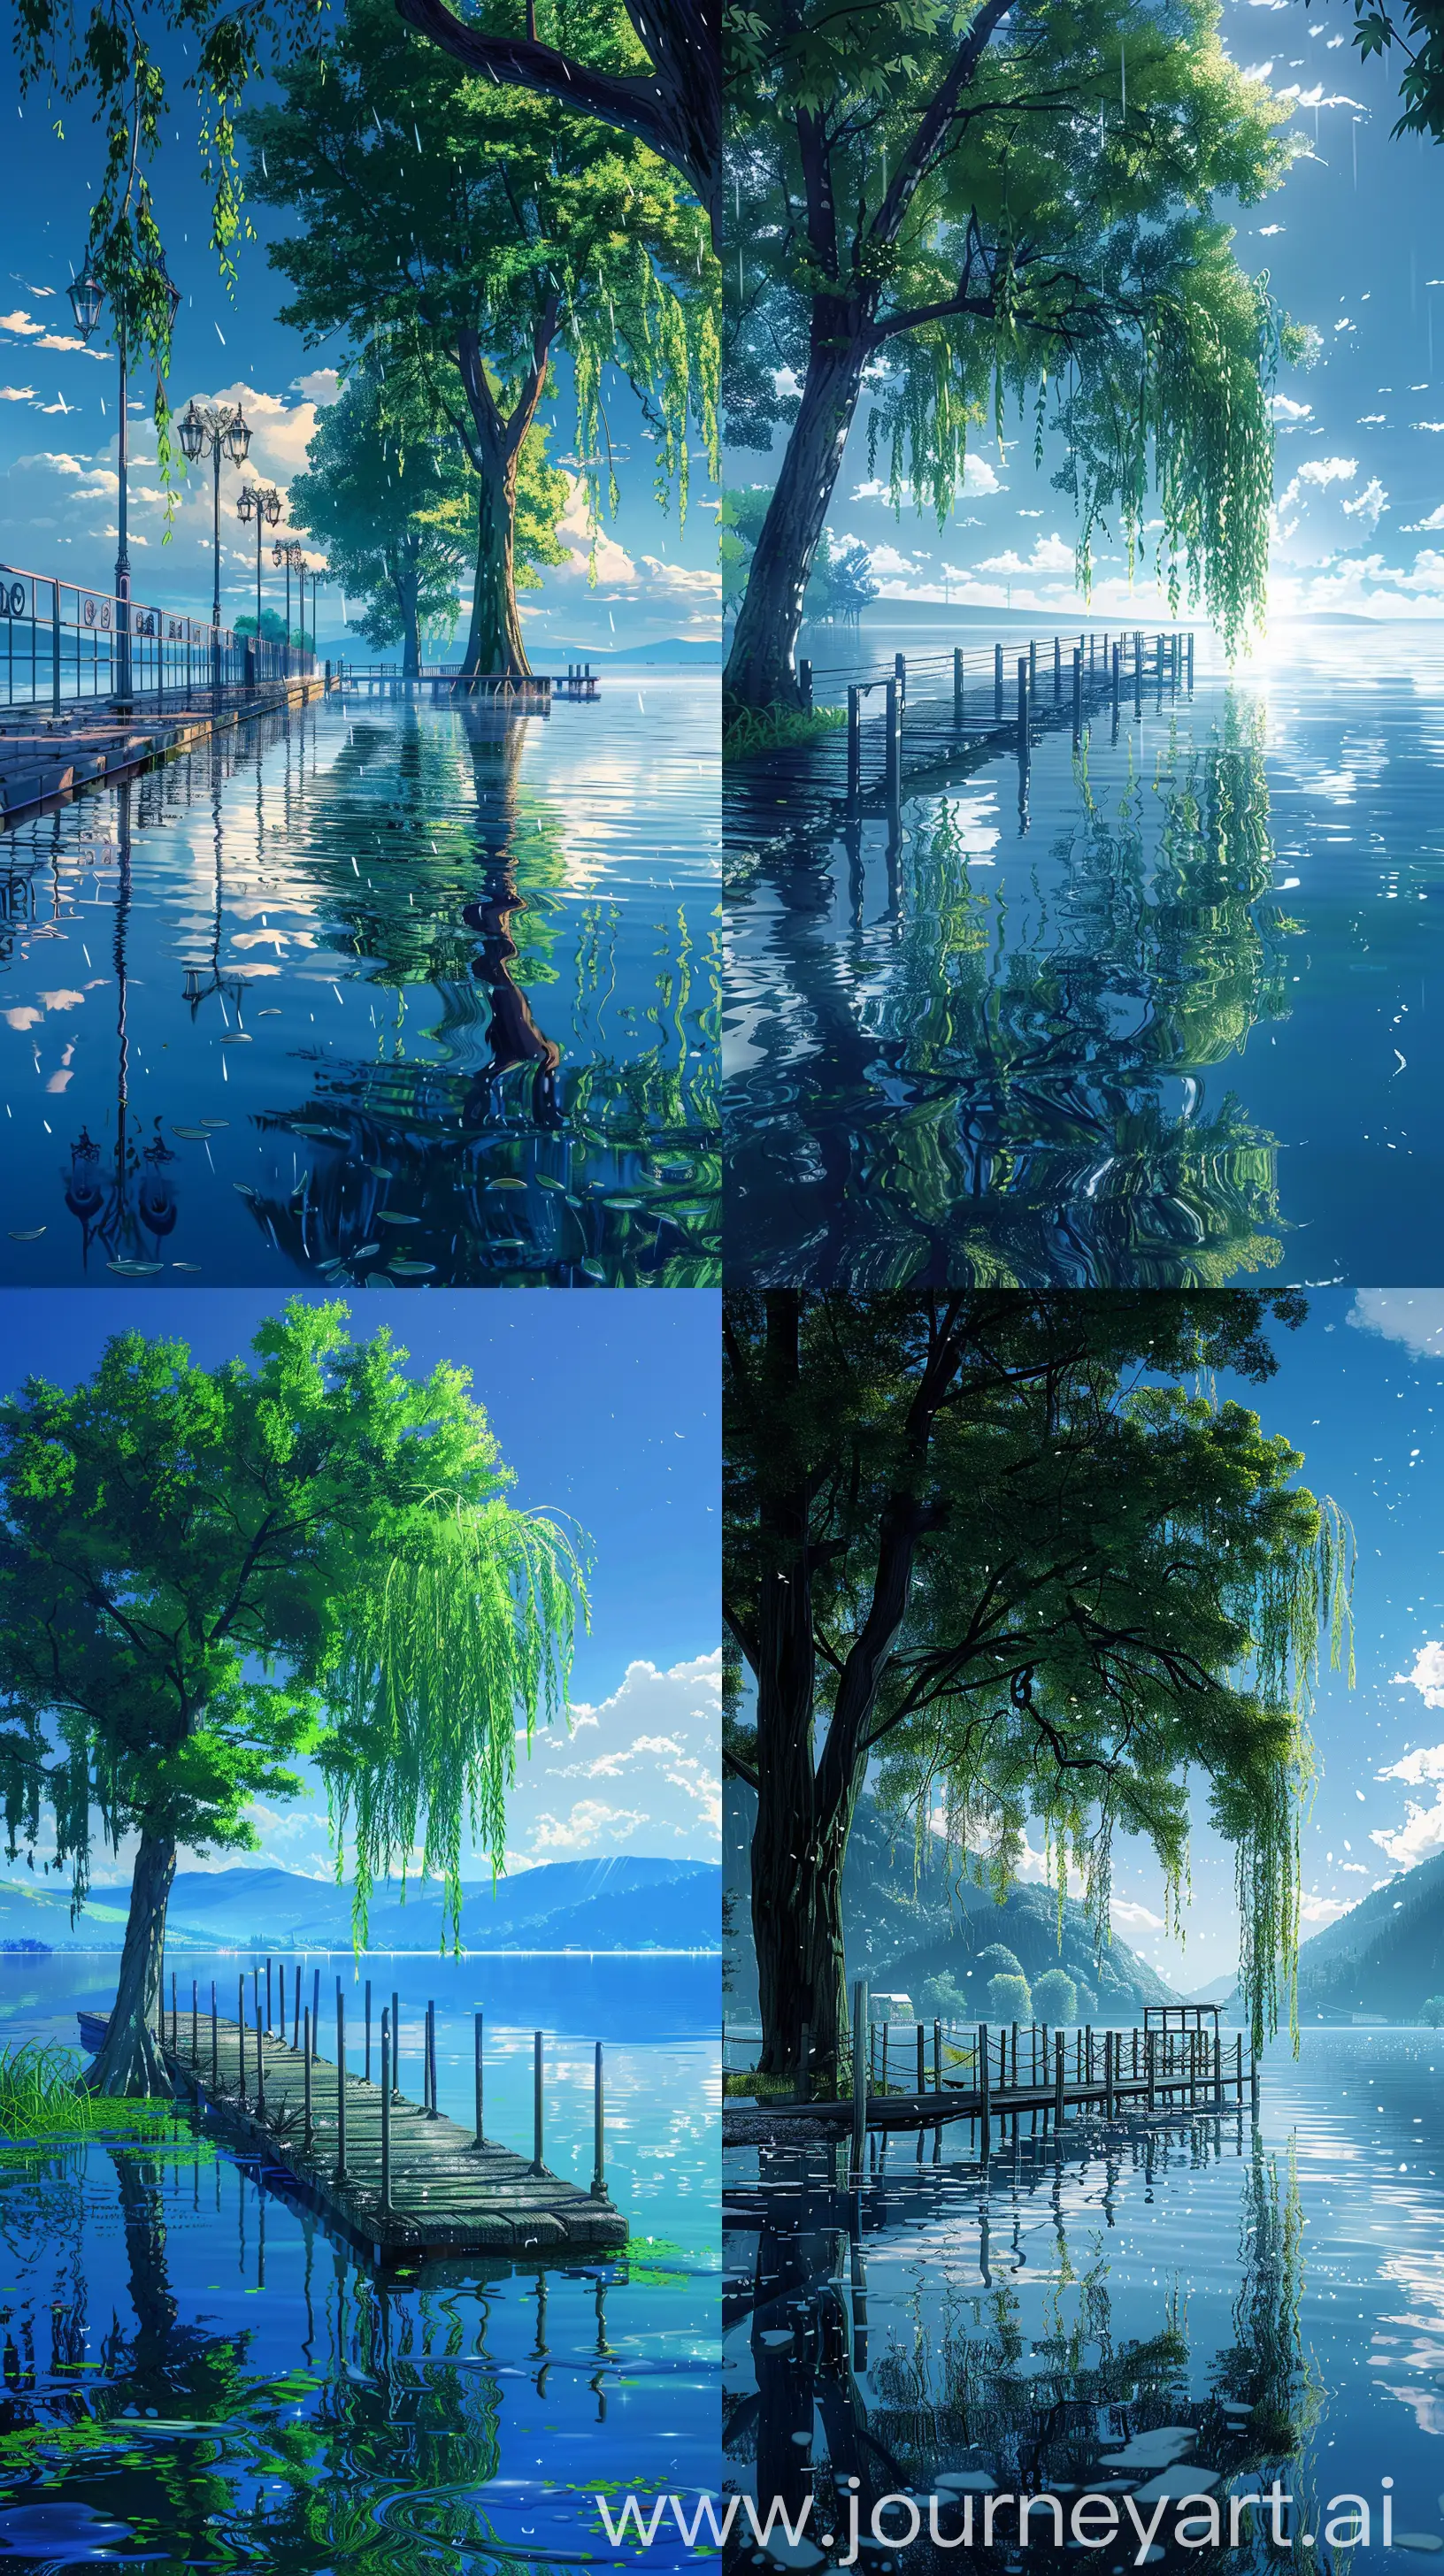 Tranquil-Hvz-Lake-Morning-Scenery-Glassy-Reflections-and-Willow-Tree-by-Pier-in-Makoto-Shinkai-Style